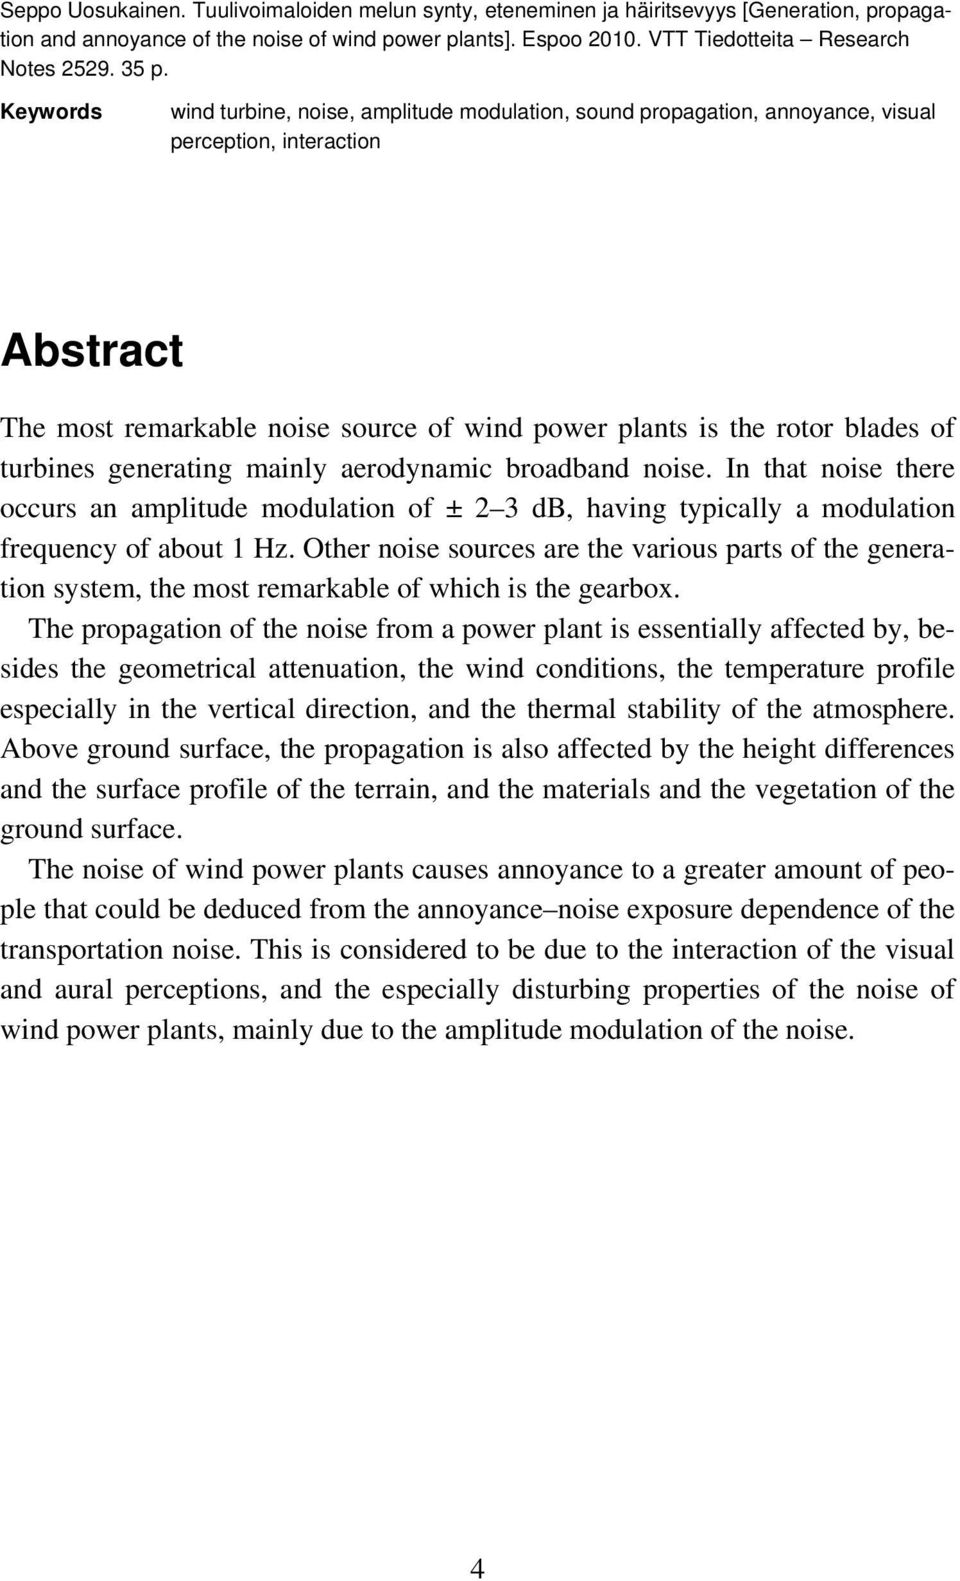 blades of turbines generating mainly aerodynamic broadband noise. In that noise there occurs an amplitude modulation of ± 2 3 db, having typically a modulation frequency of about 1 Hz.